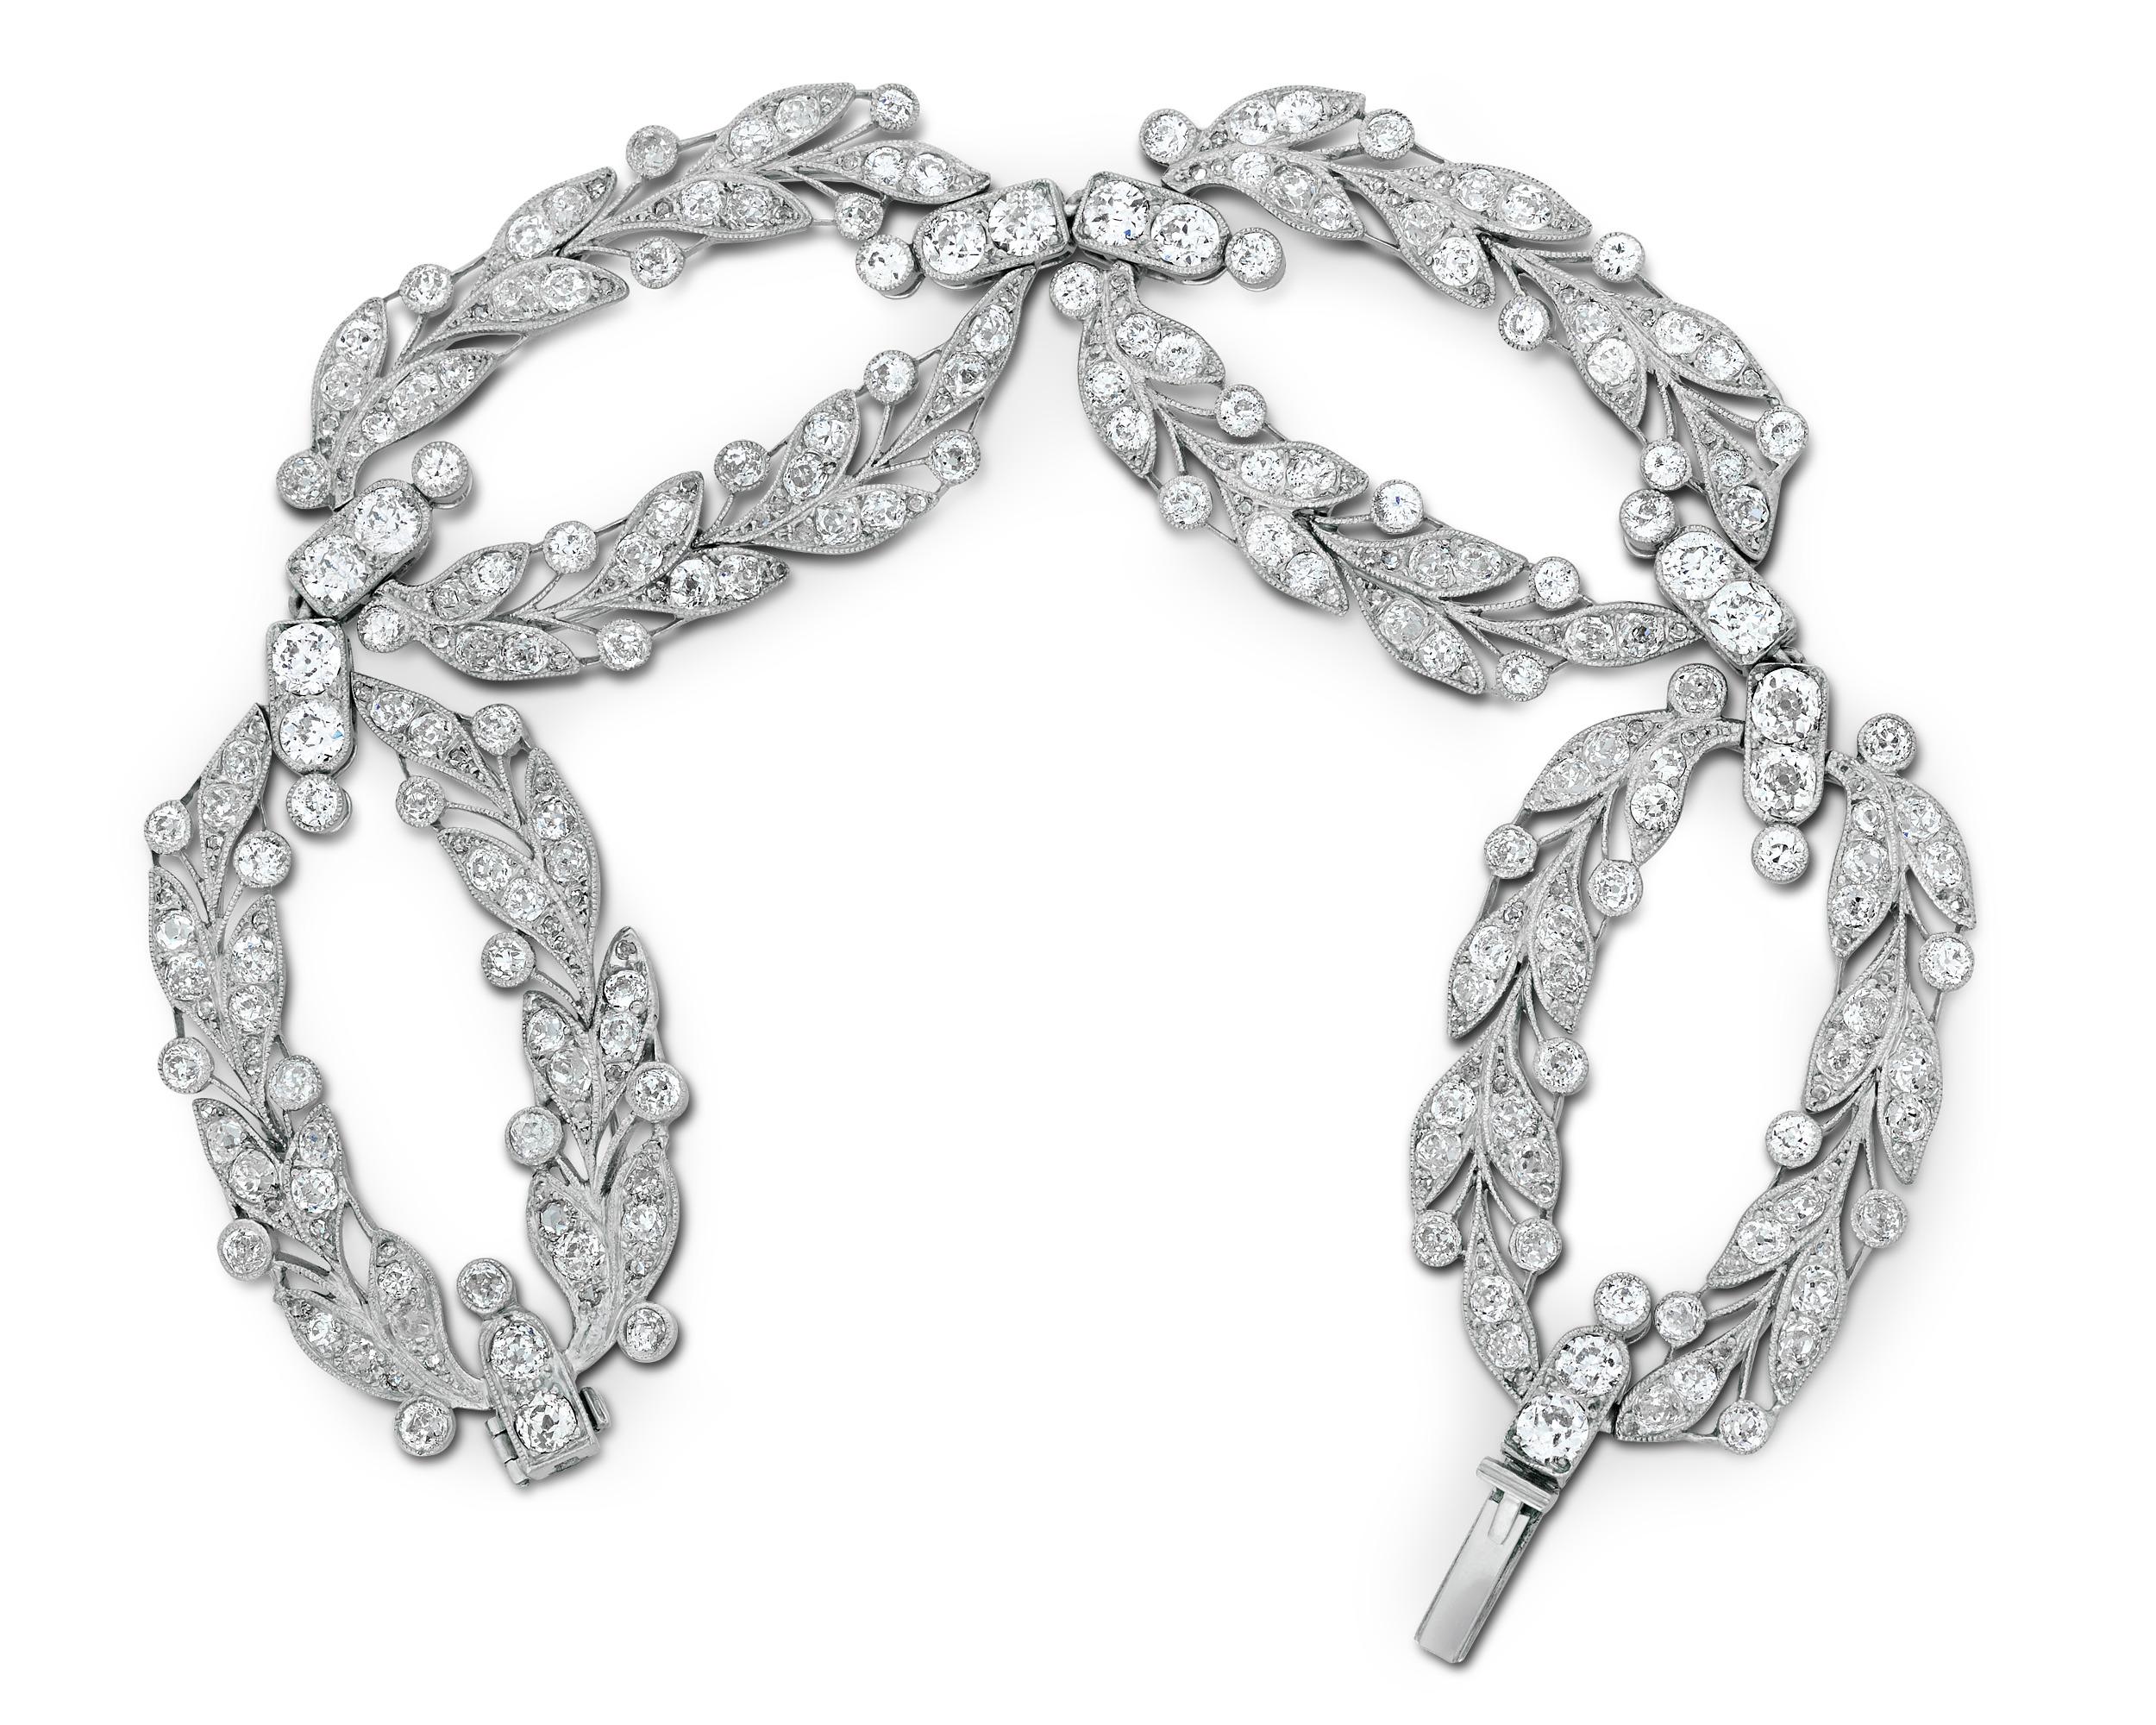 This delicate and enchanting laurel wreath bracelet hails from the esteemed firm Cartier Paris. Composed of four open oval links in a fine foliate design, the bracelet features millegrain-set Old European-cut and Old Mine-cut white diamonds. The